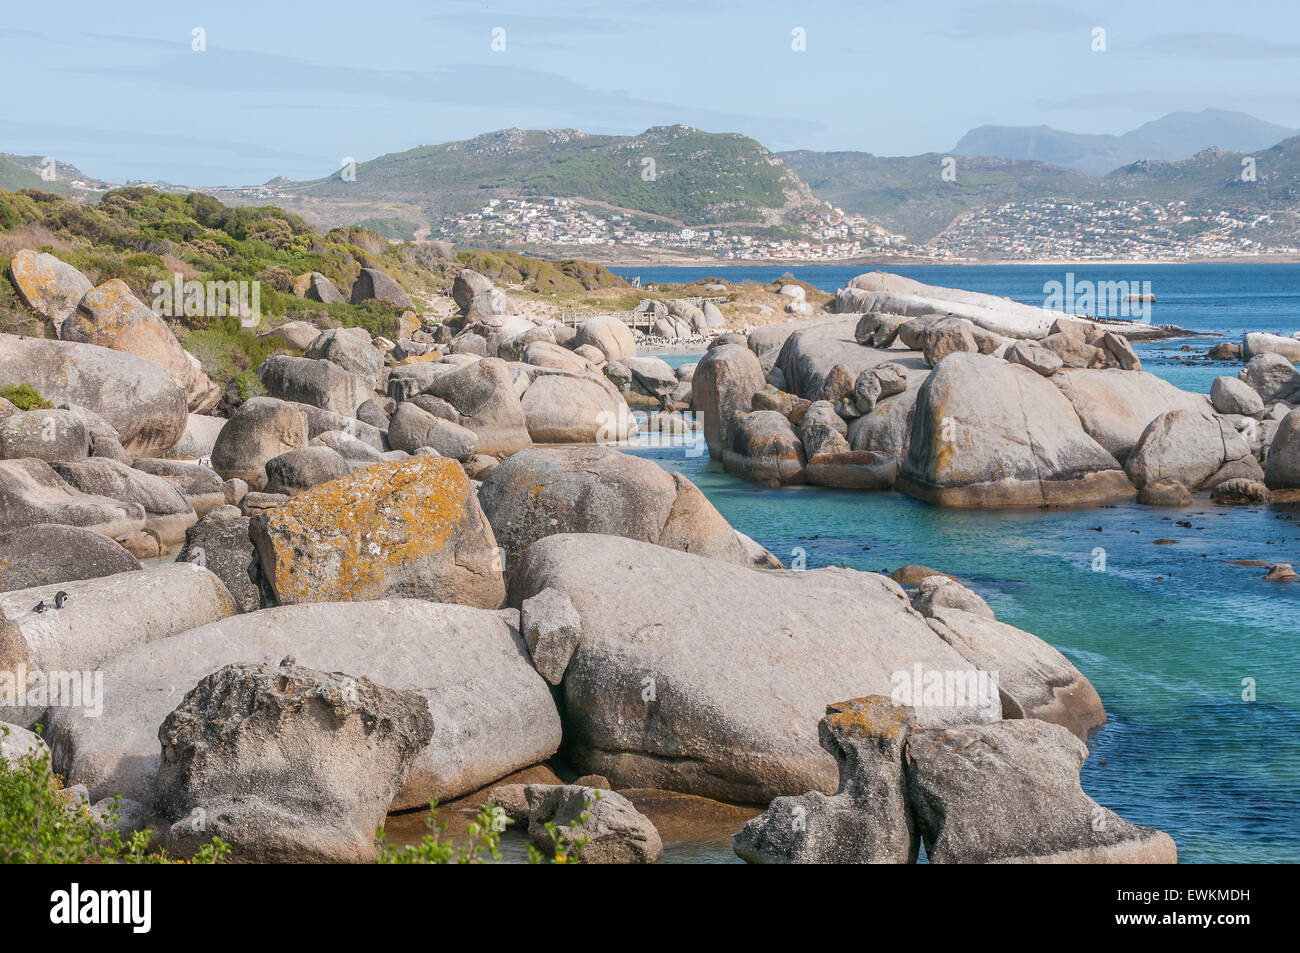 The Boulders section of the Table Mountain National Park is in Simons Town. It is home to a land-based colony of endangered Afri Stock Photo